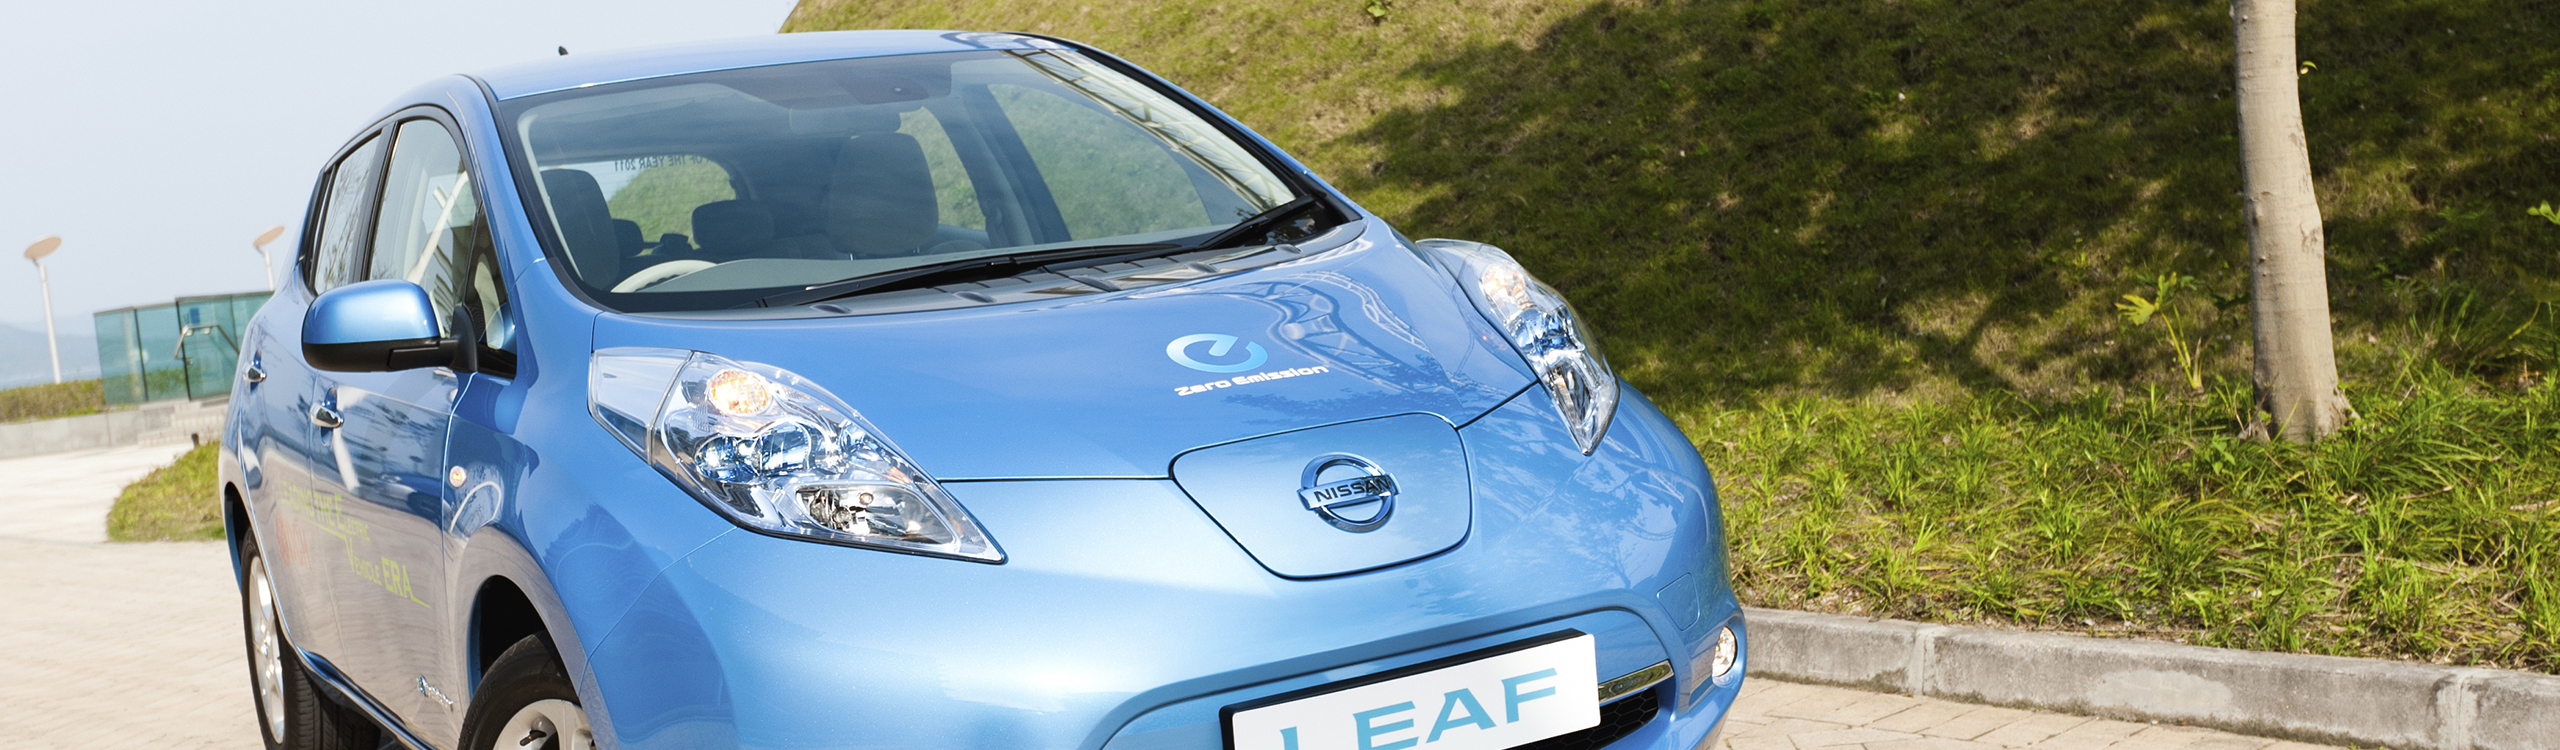 picture of the electric car model of a nissian leaf